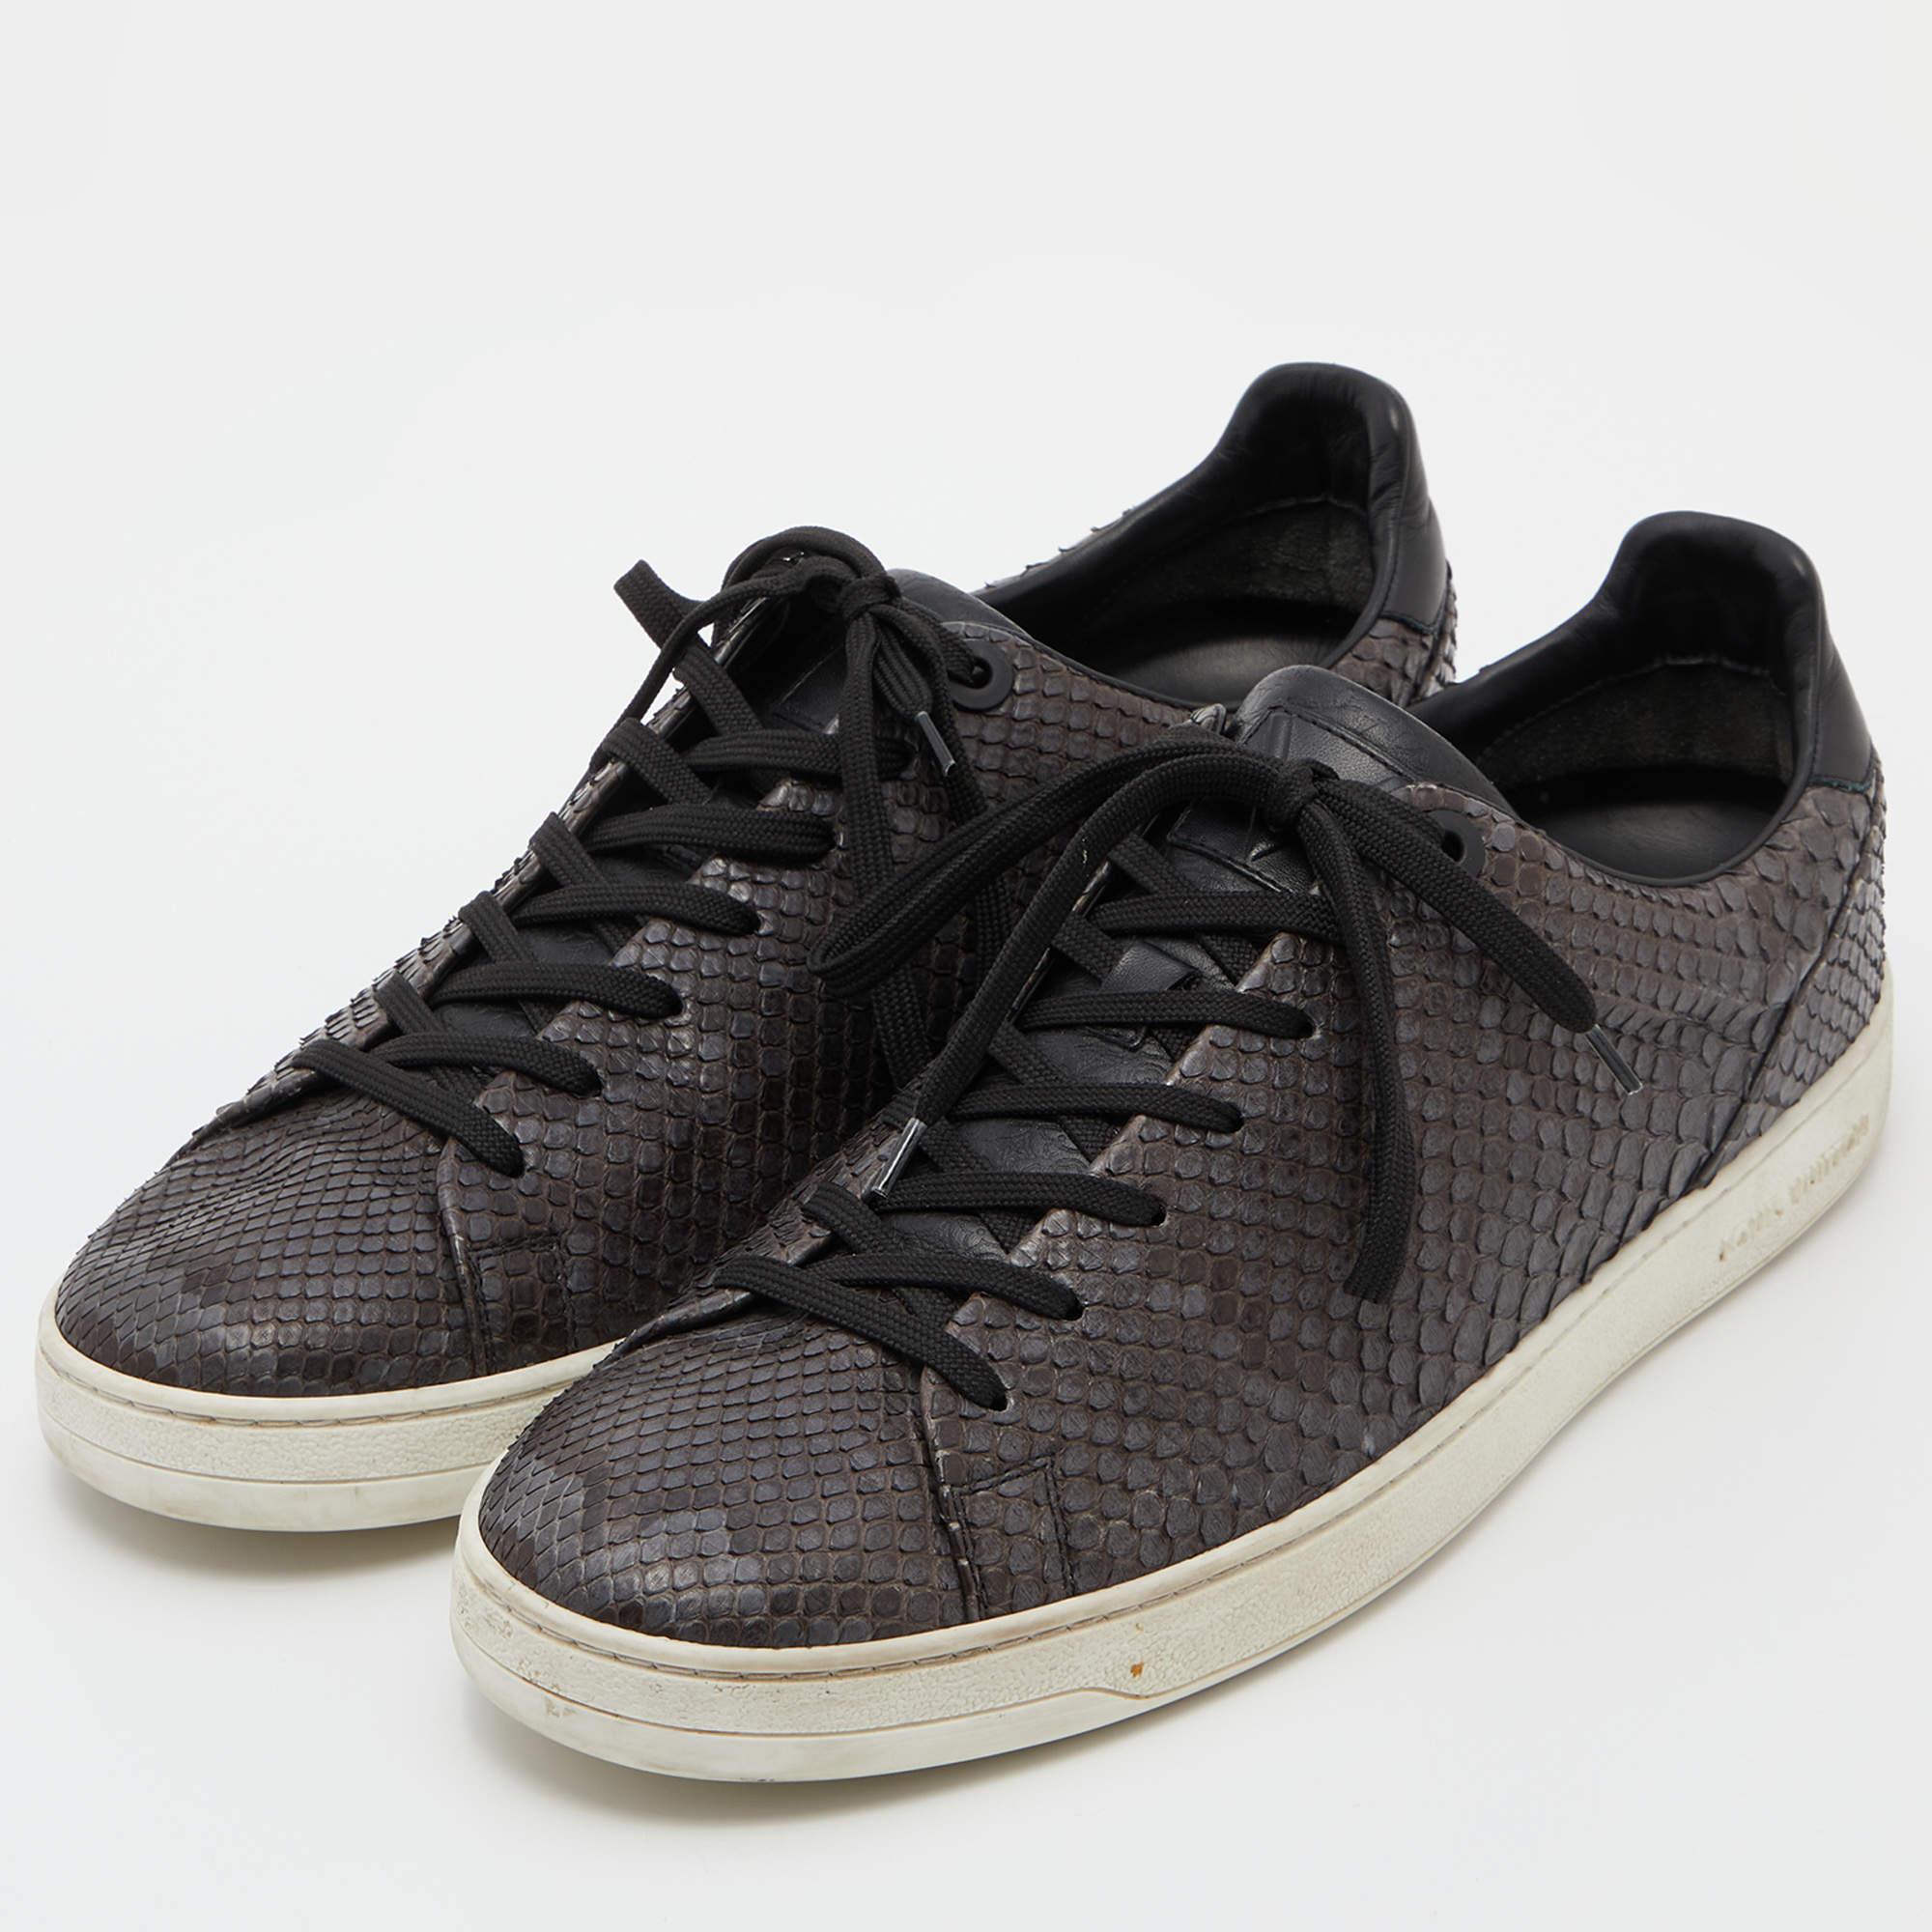 This season is all about sneakers and this Louis Vuitton pair is sure to keep you ahead of the fashion game. It features a two-tone python leather body and detailed with front-row lace-ups. Set on a comfortable rubber sole, this pair makes for a